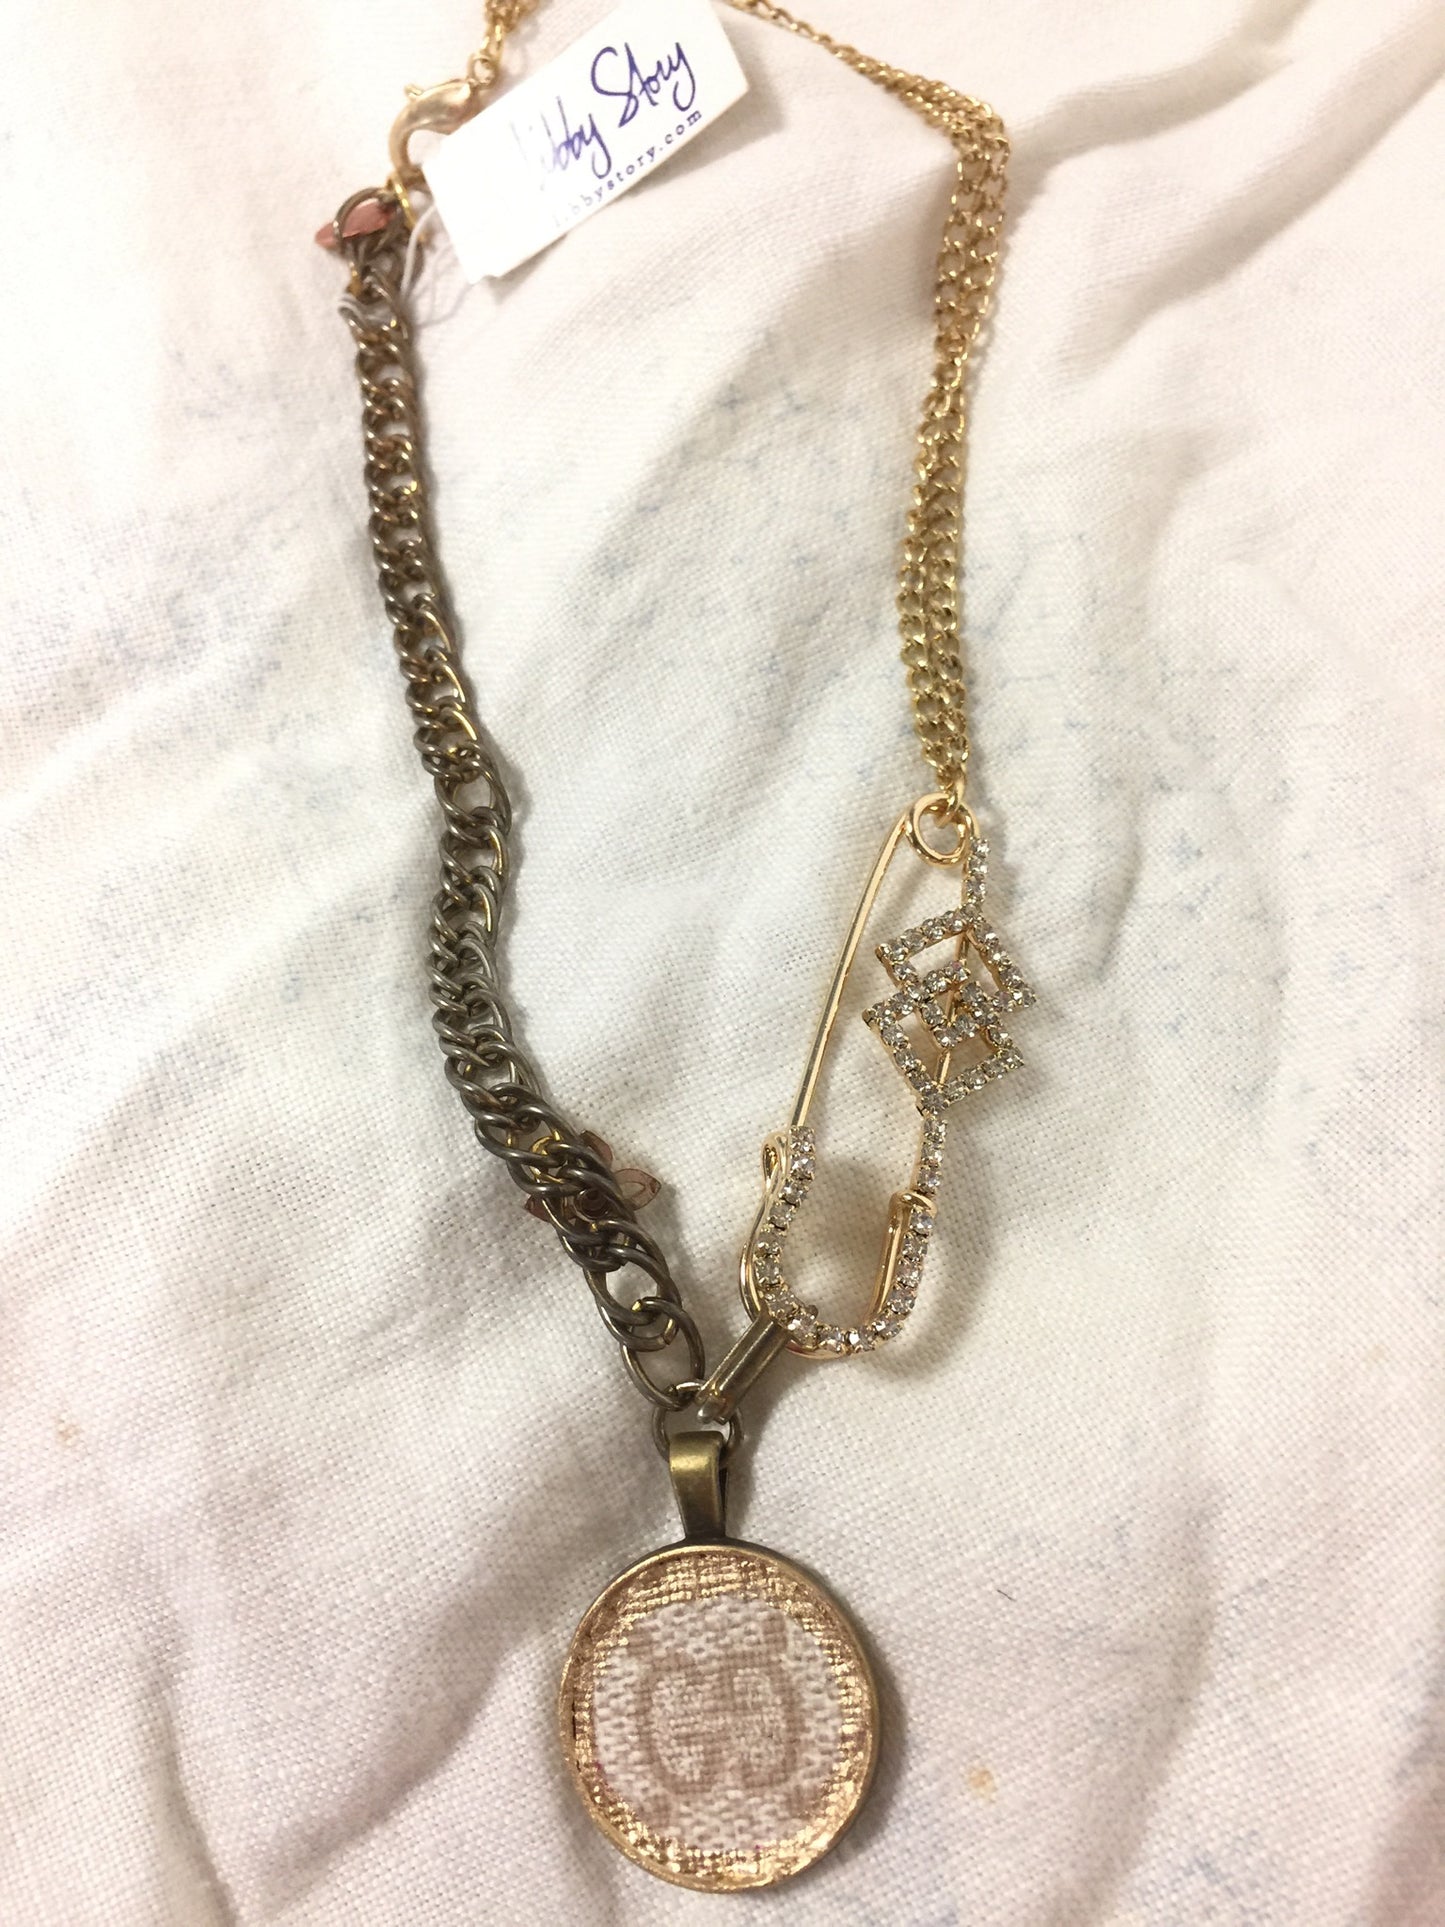 LS Upcycled GG Pin Necklace